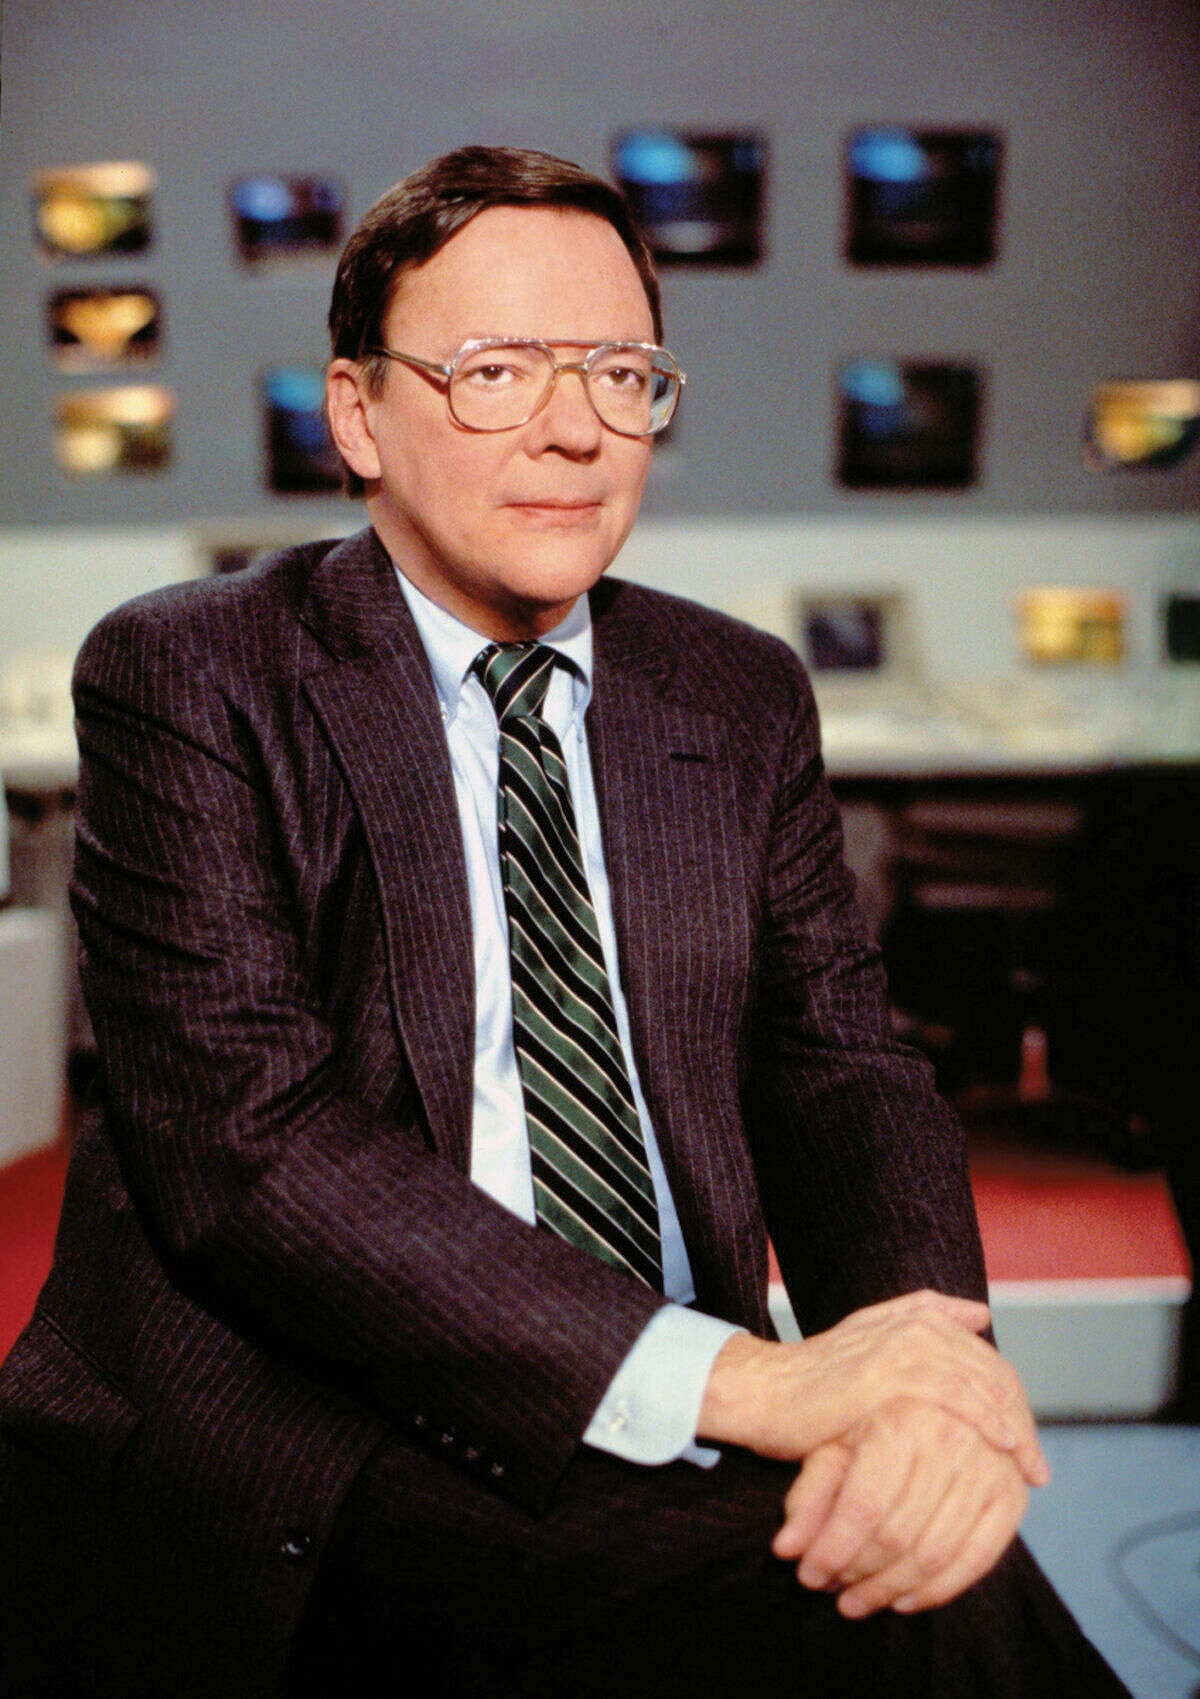 In this June 28, 1988 photo released by CBS, CBS News correspondent Bruce Morton poses on the set of the CBS news room in New York. Morton, an award-winning political correspondent for CBS News who also covered the Vietnam War and the space program, died Friday, Sept. 5, 2014, at his home in Washington, D.C., after a battle with cancer. He was 83. (AP Photo/CBS)